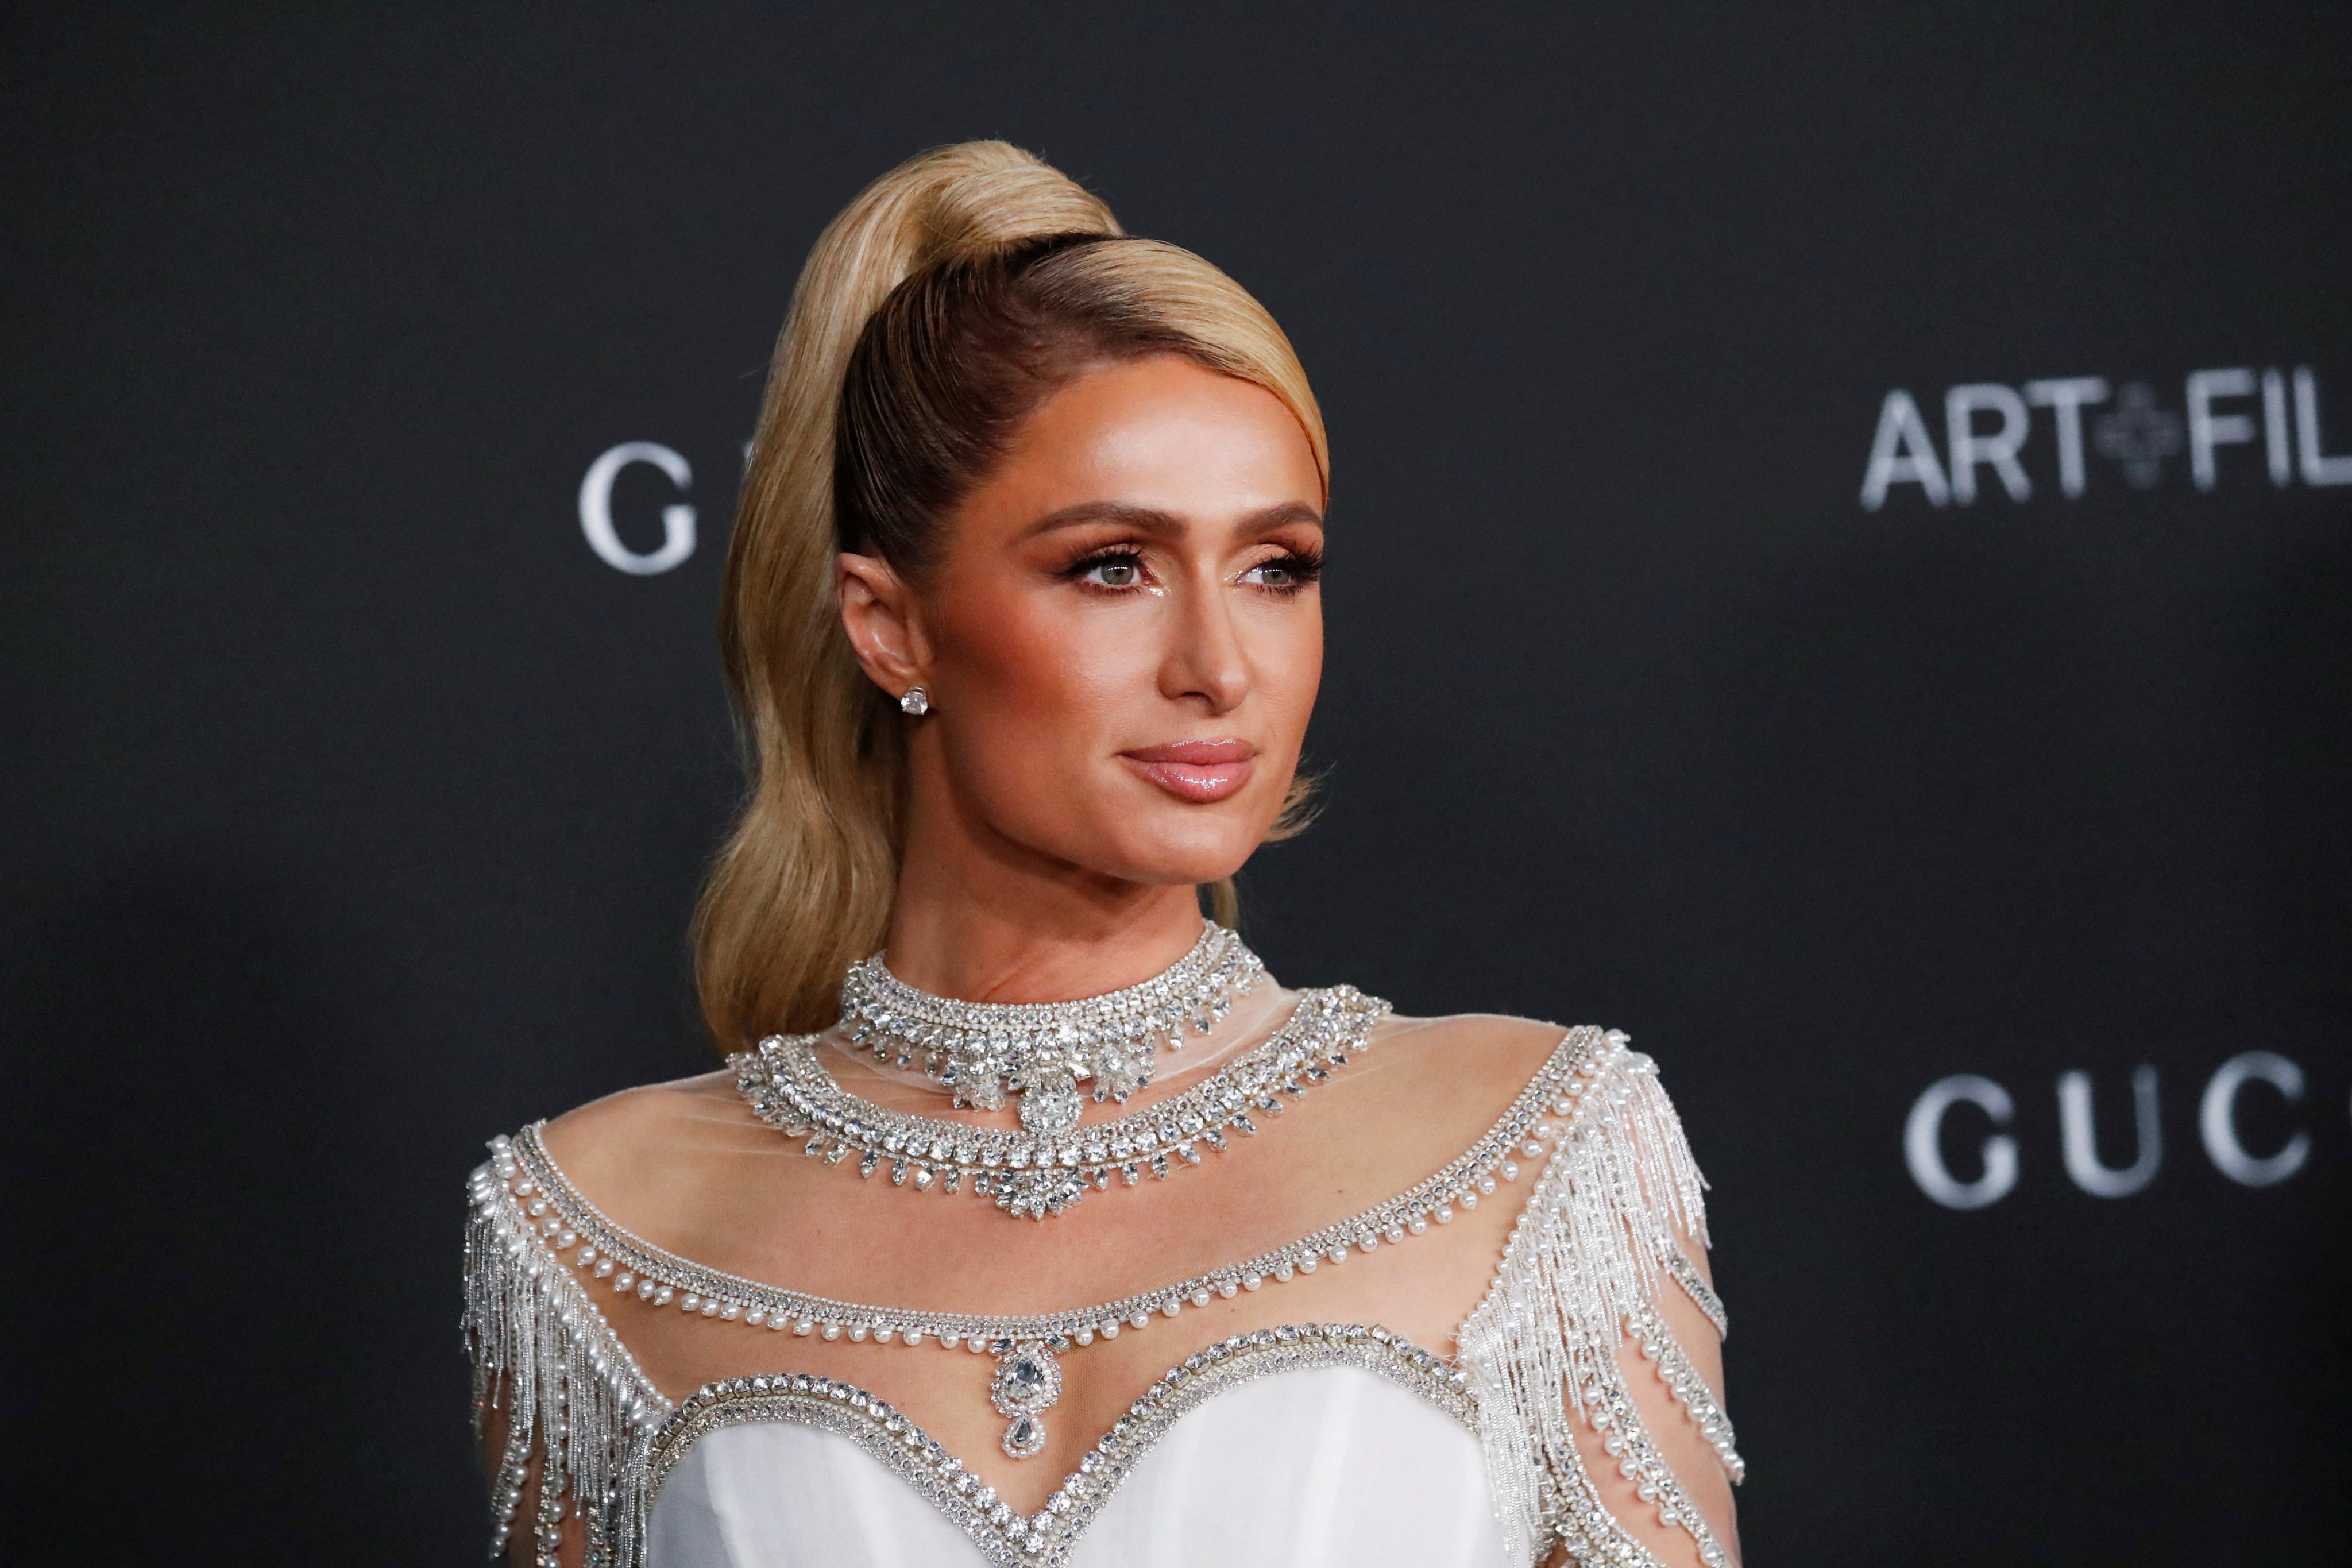 Paris Hilton at the Lacma Art+Film Gala in Los Angeles, California, US on November 6, 2021. She has launched her own metaverse business on Roblox. Photo: Reuters